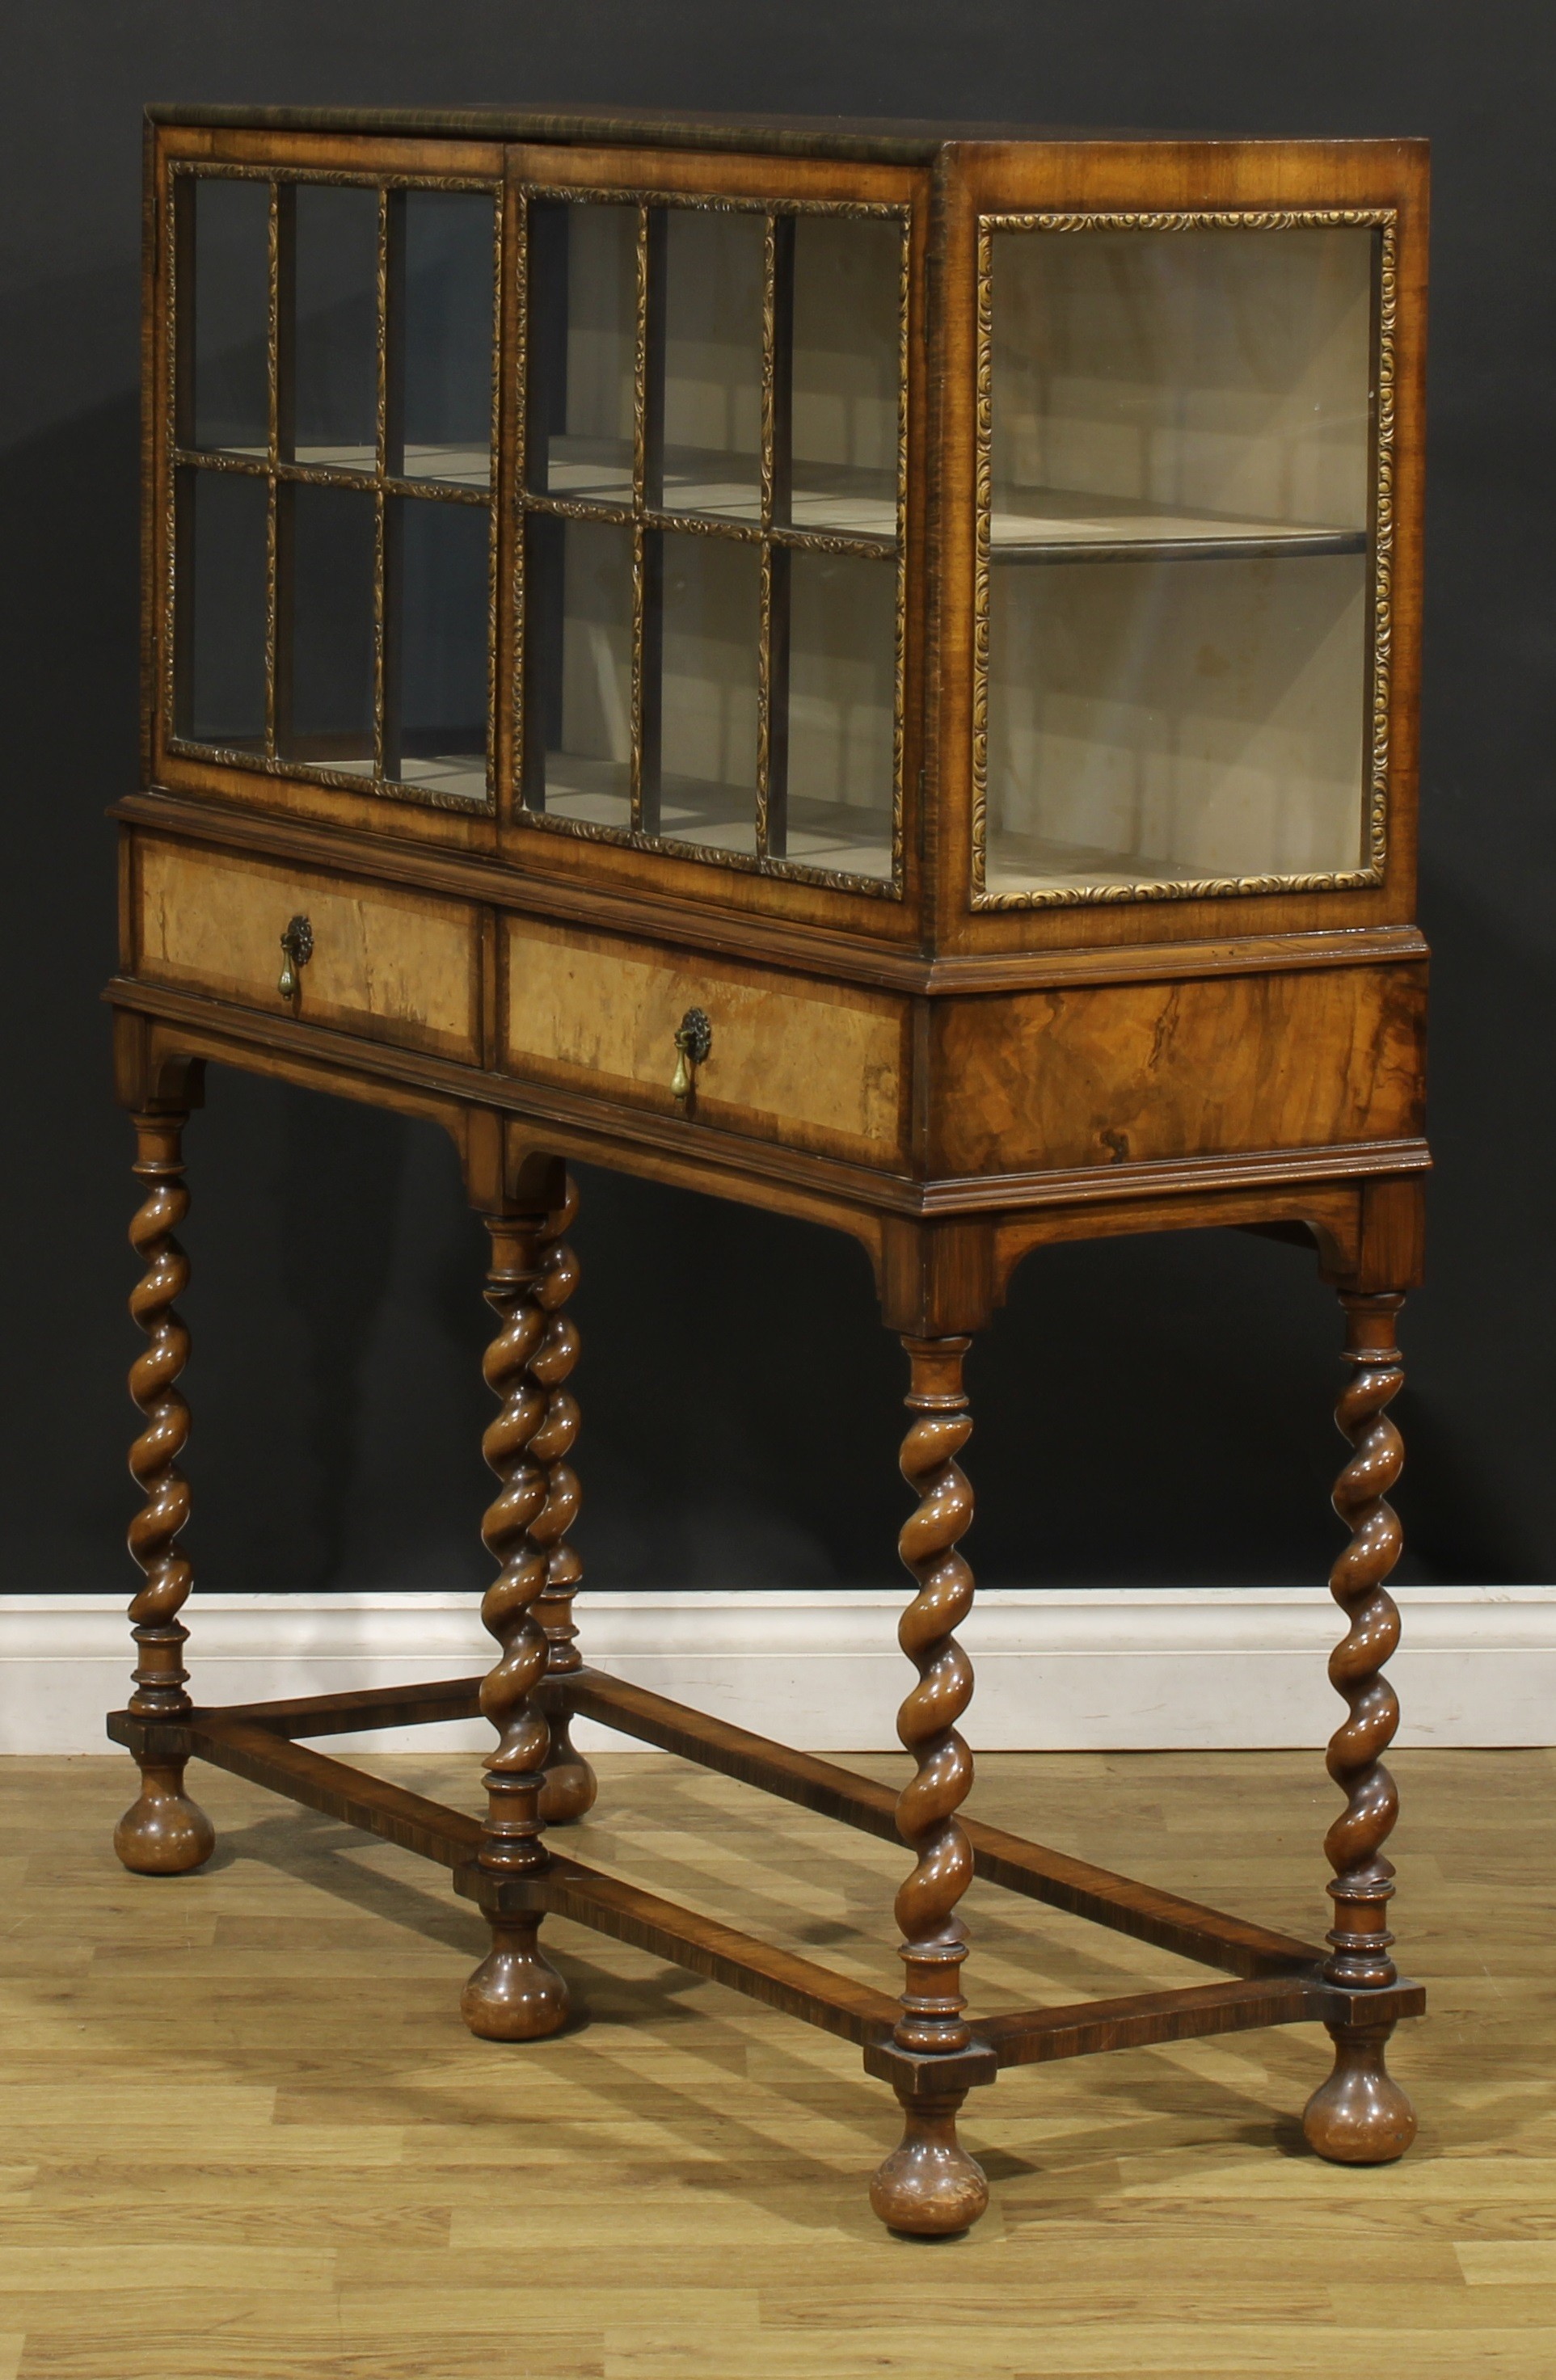 An early 20th century Queen Anne style walnut bookcase or display cabinet, by Hamptons, Pall Mall - Image 5 of 7